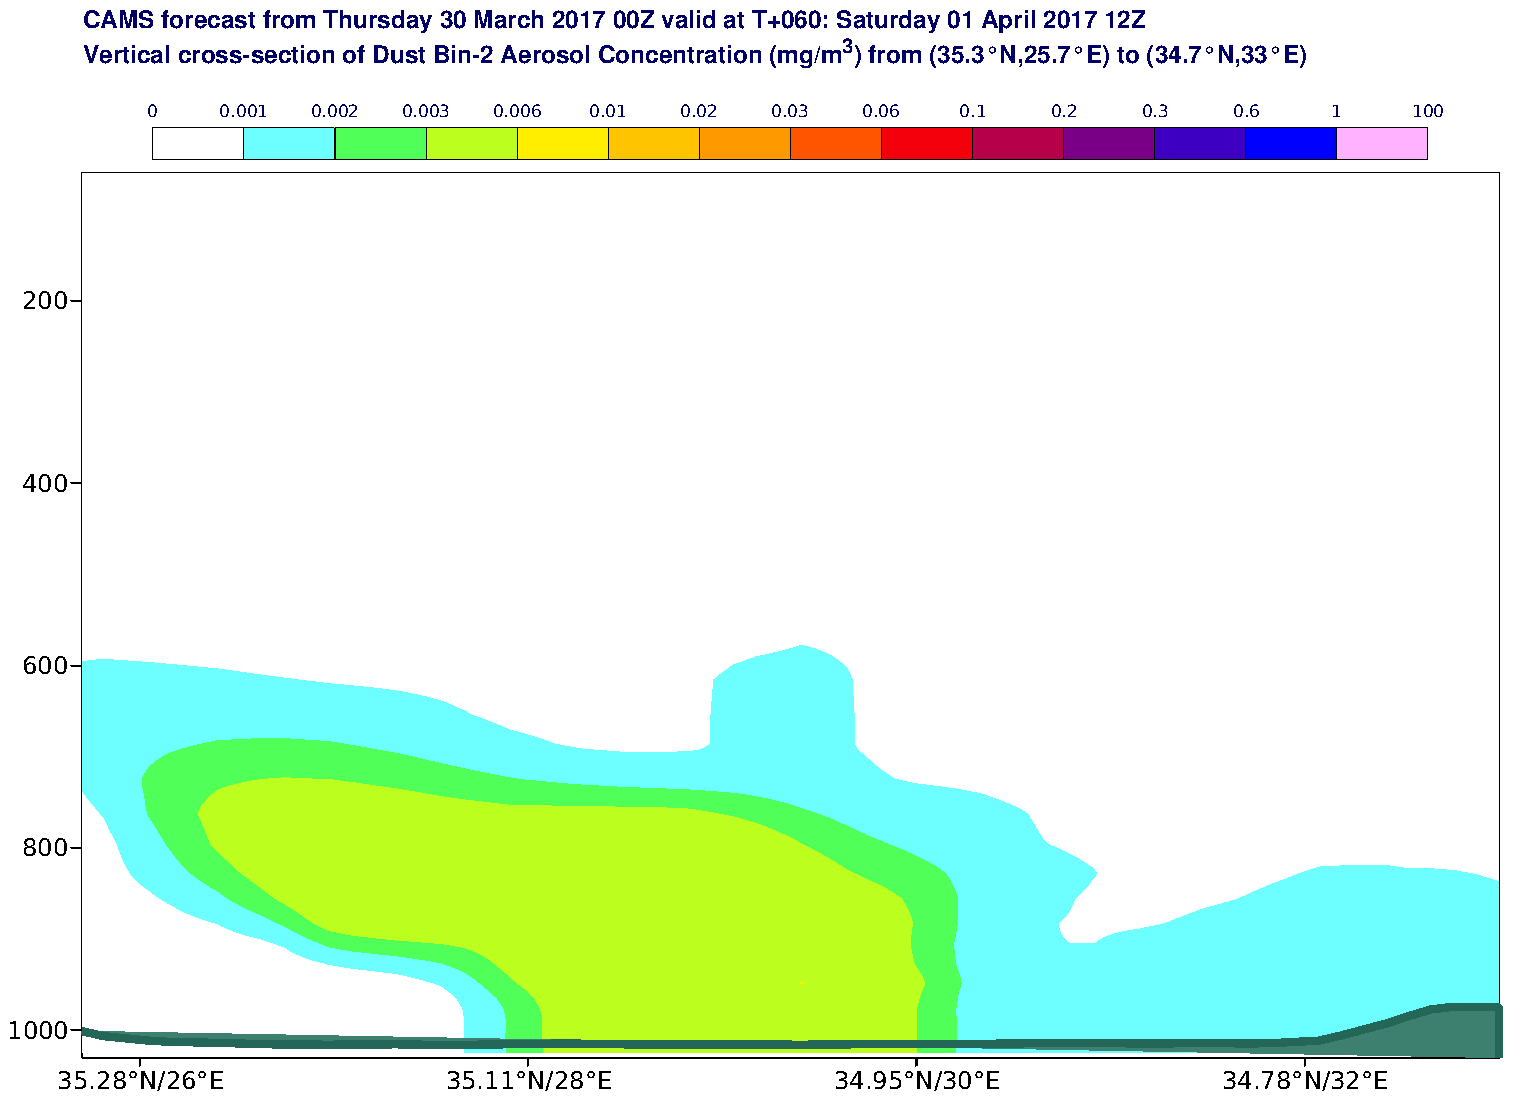 Vertical cross-section of Dust Bin-2 Aerosol Concentration (mg/m3) valid at T60 - 2017-04-01 12:00